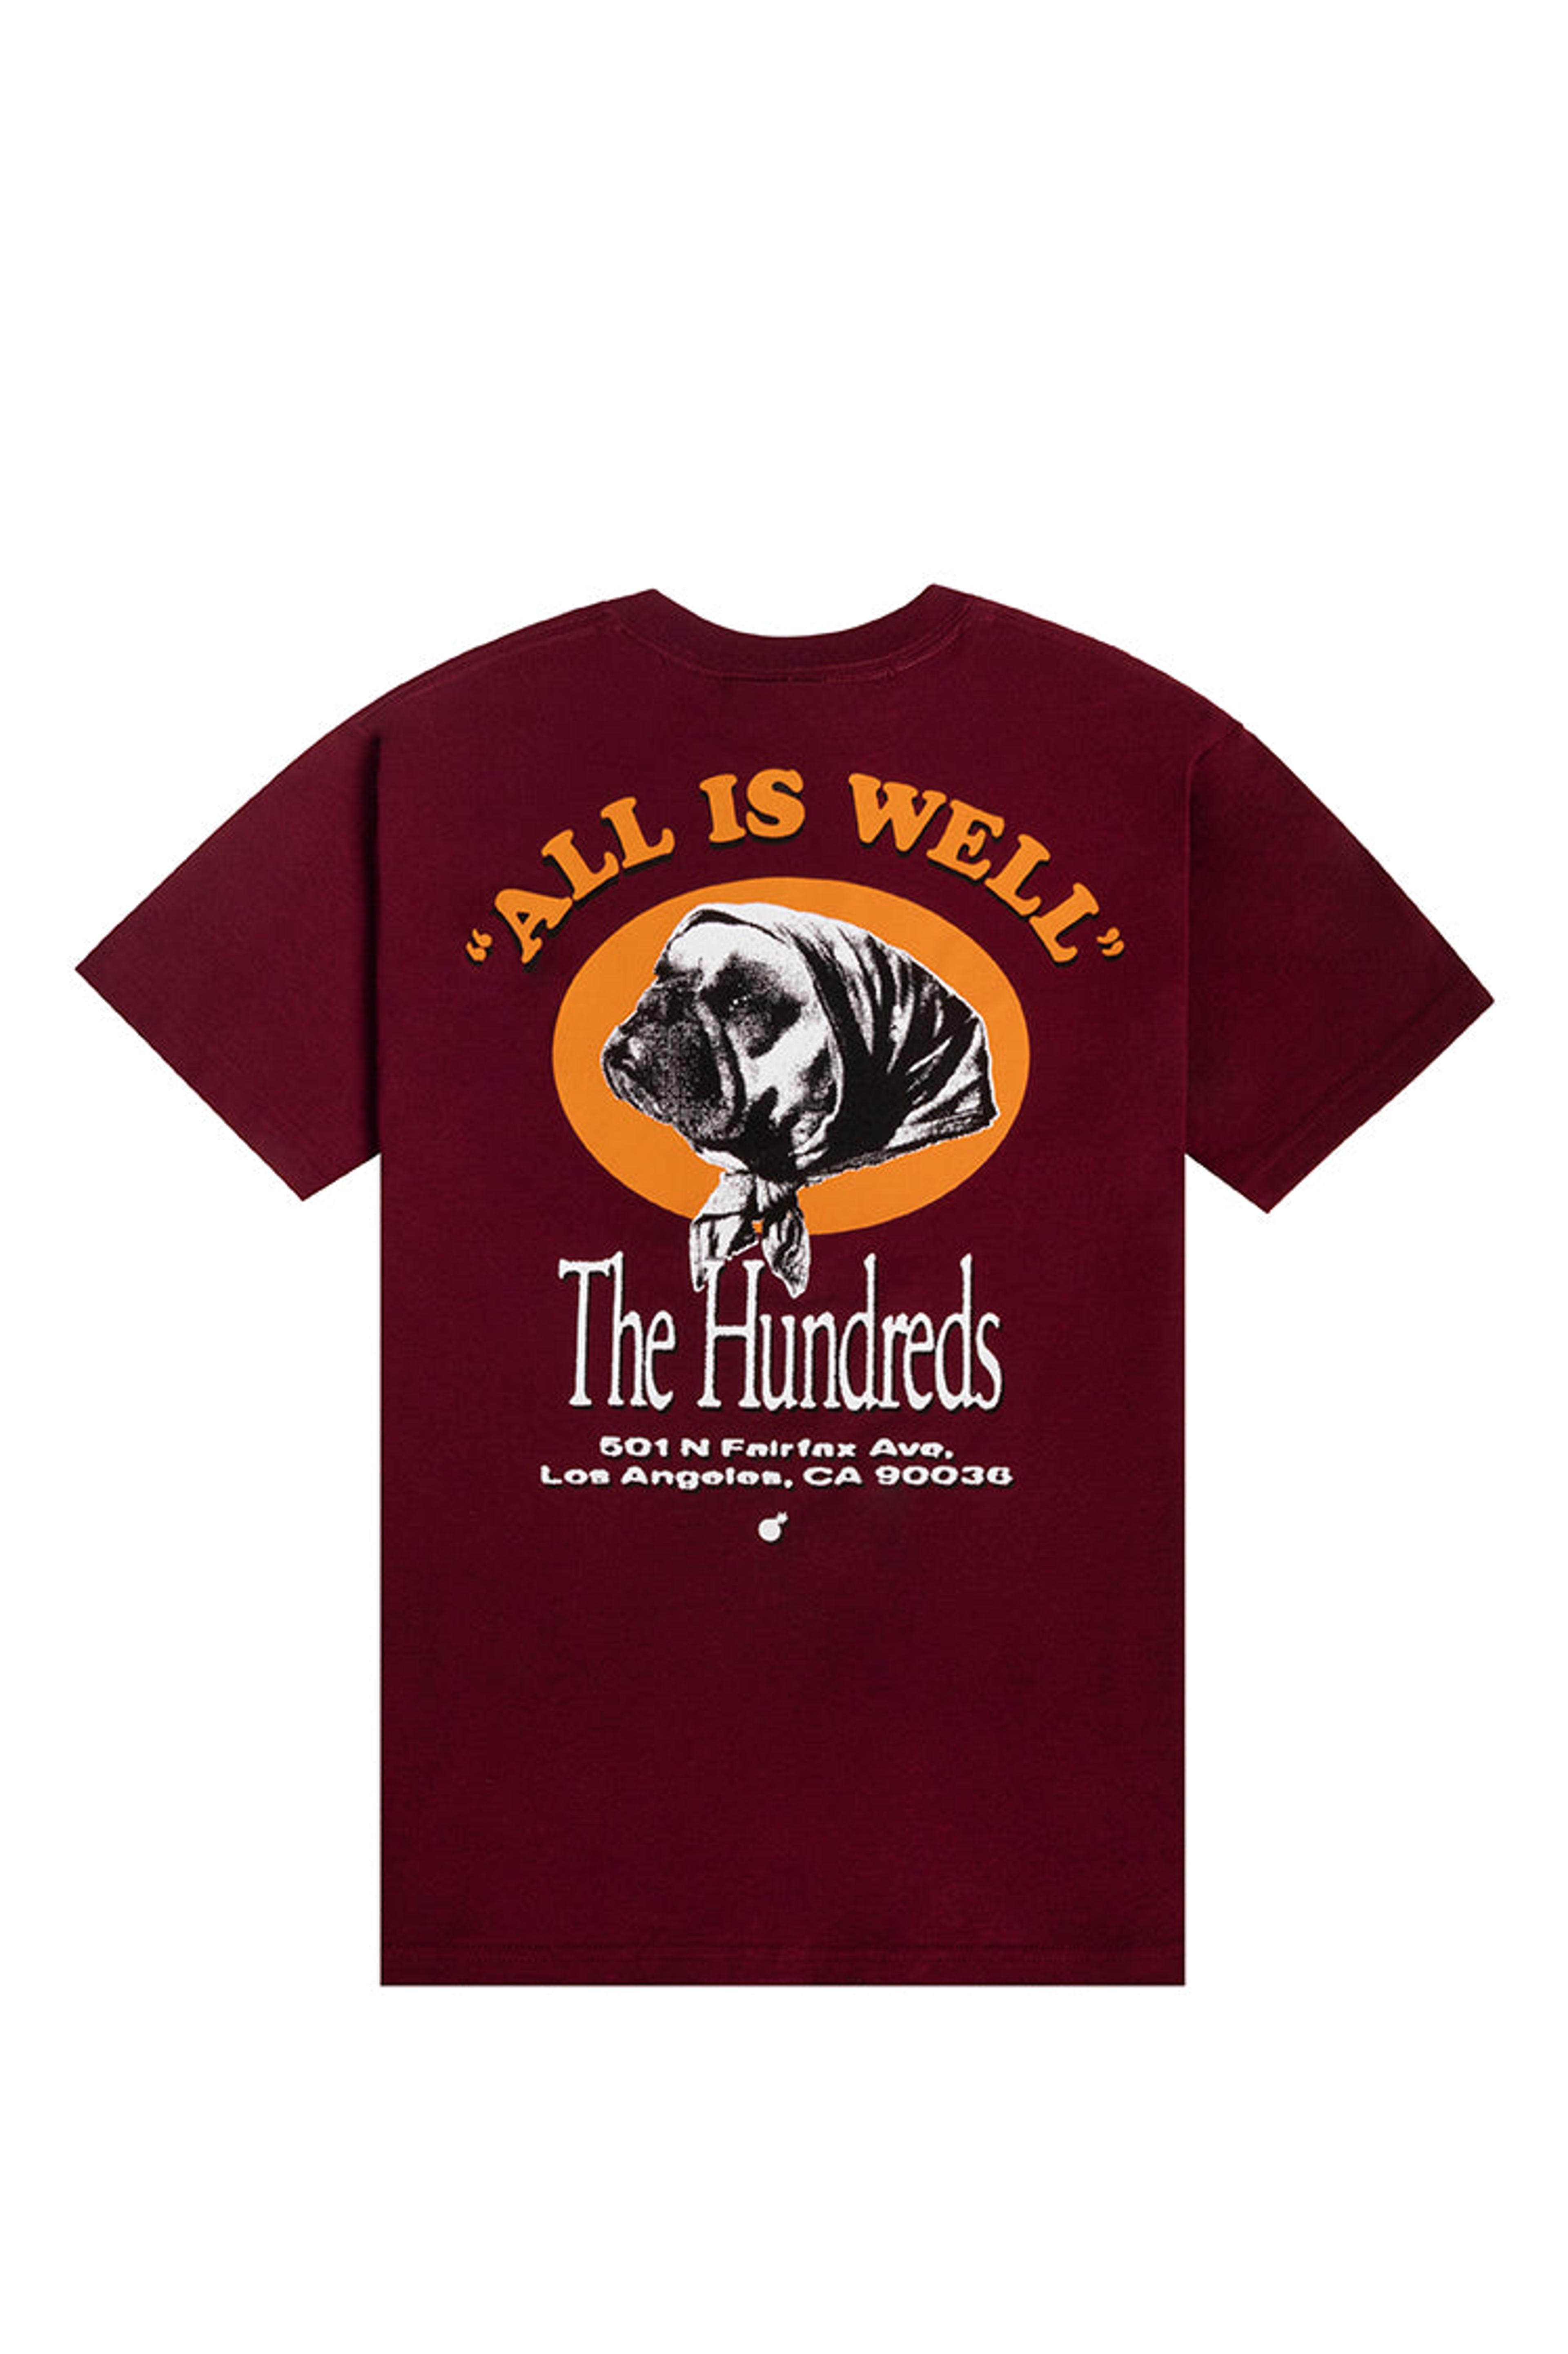 All Is Well T-Shirt